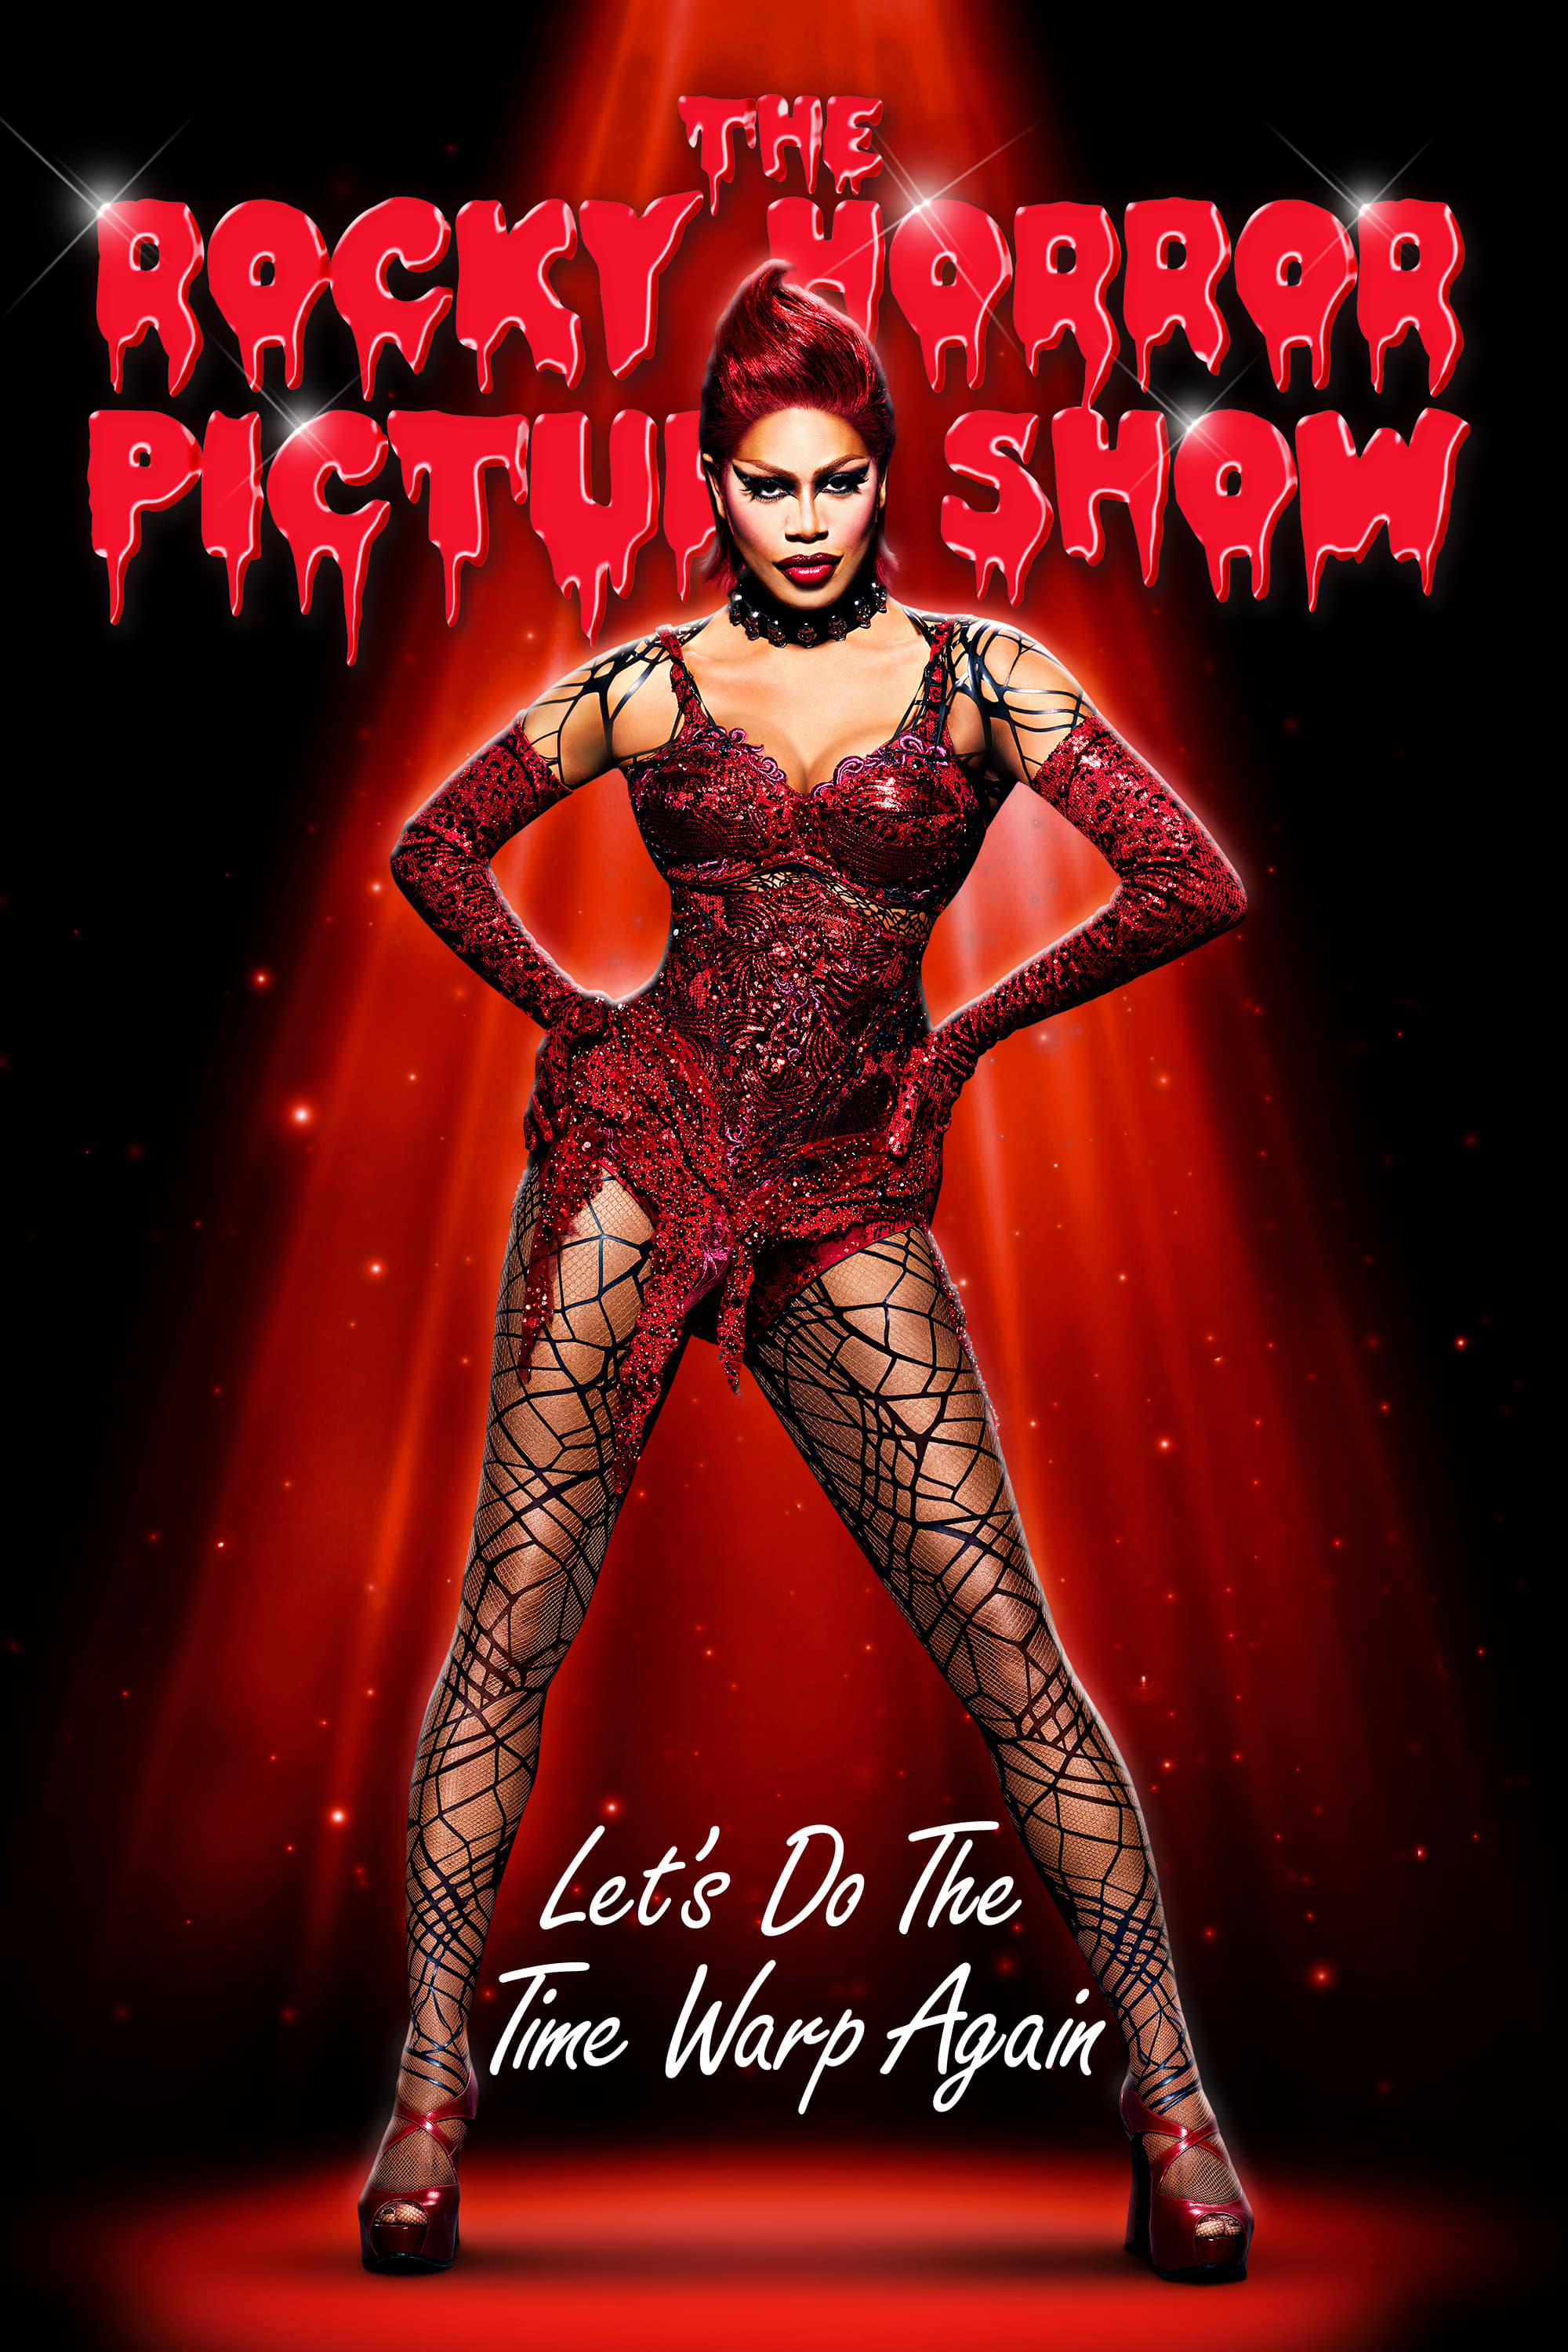 Rocky Horror Picture Show Full Movie Watch Online Free The Rocky Horror Picture Show: Let's Do the Time Warp Again (2016